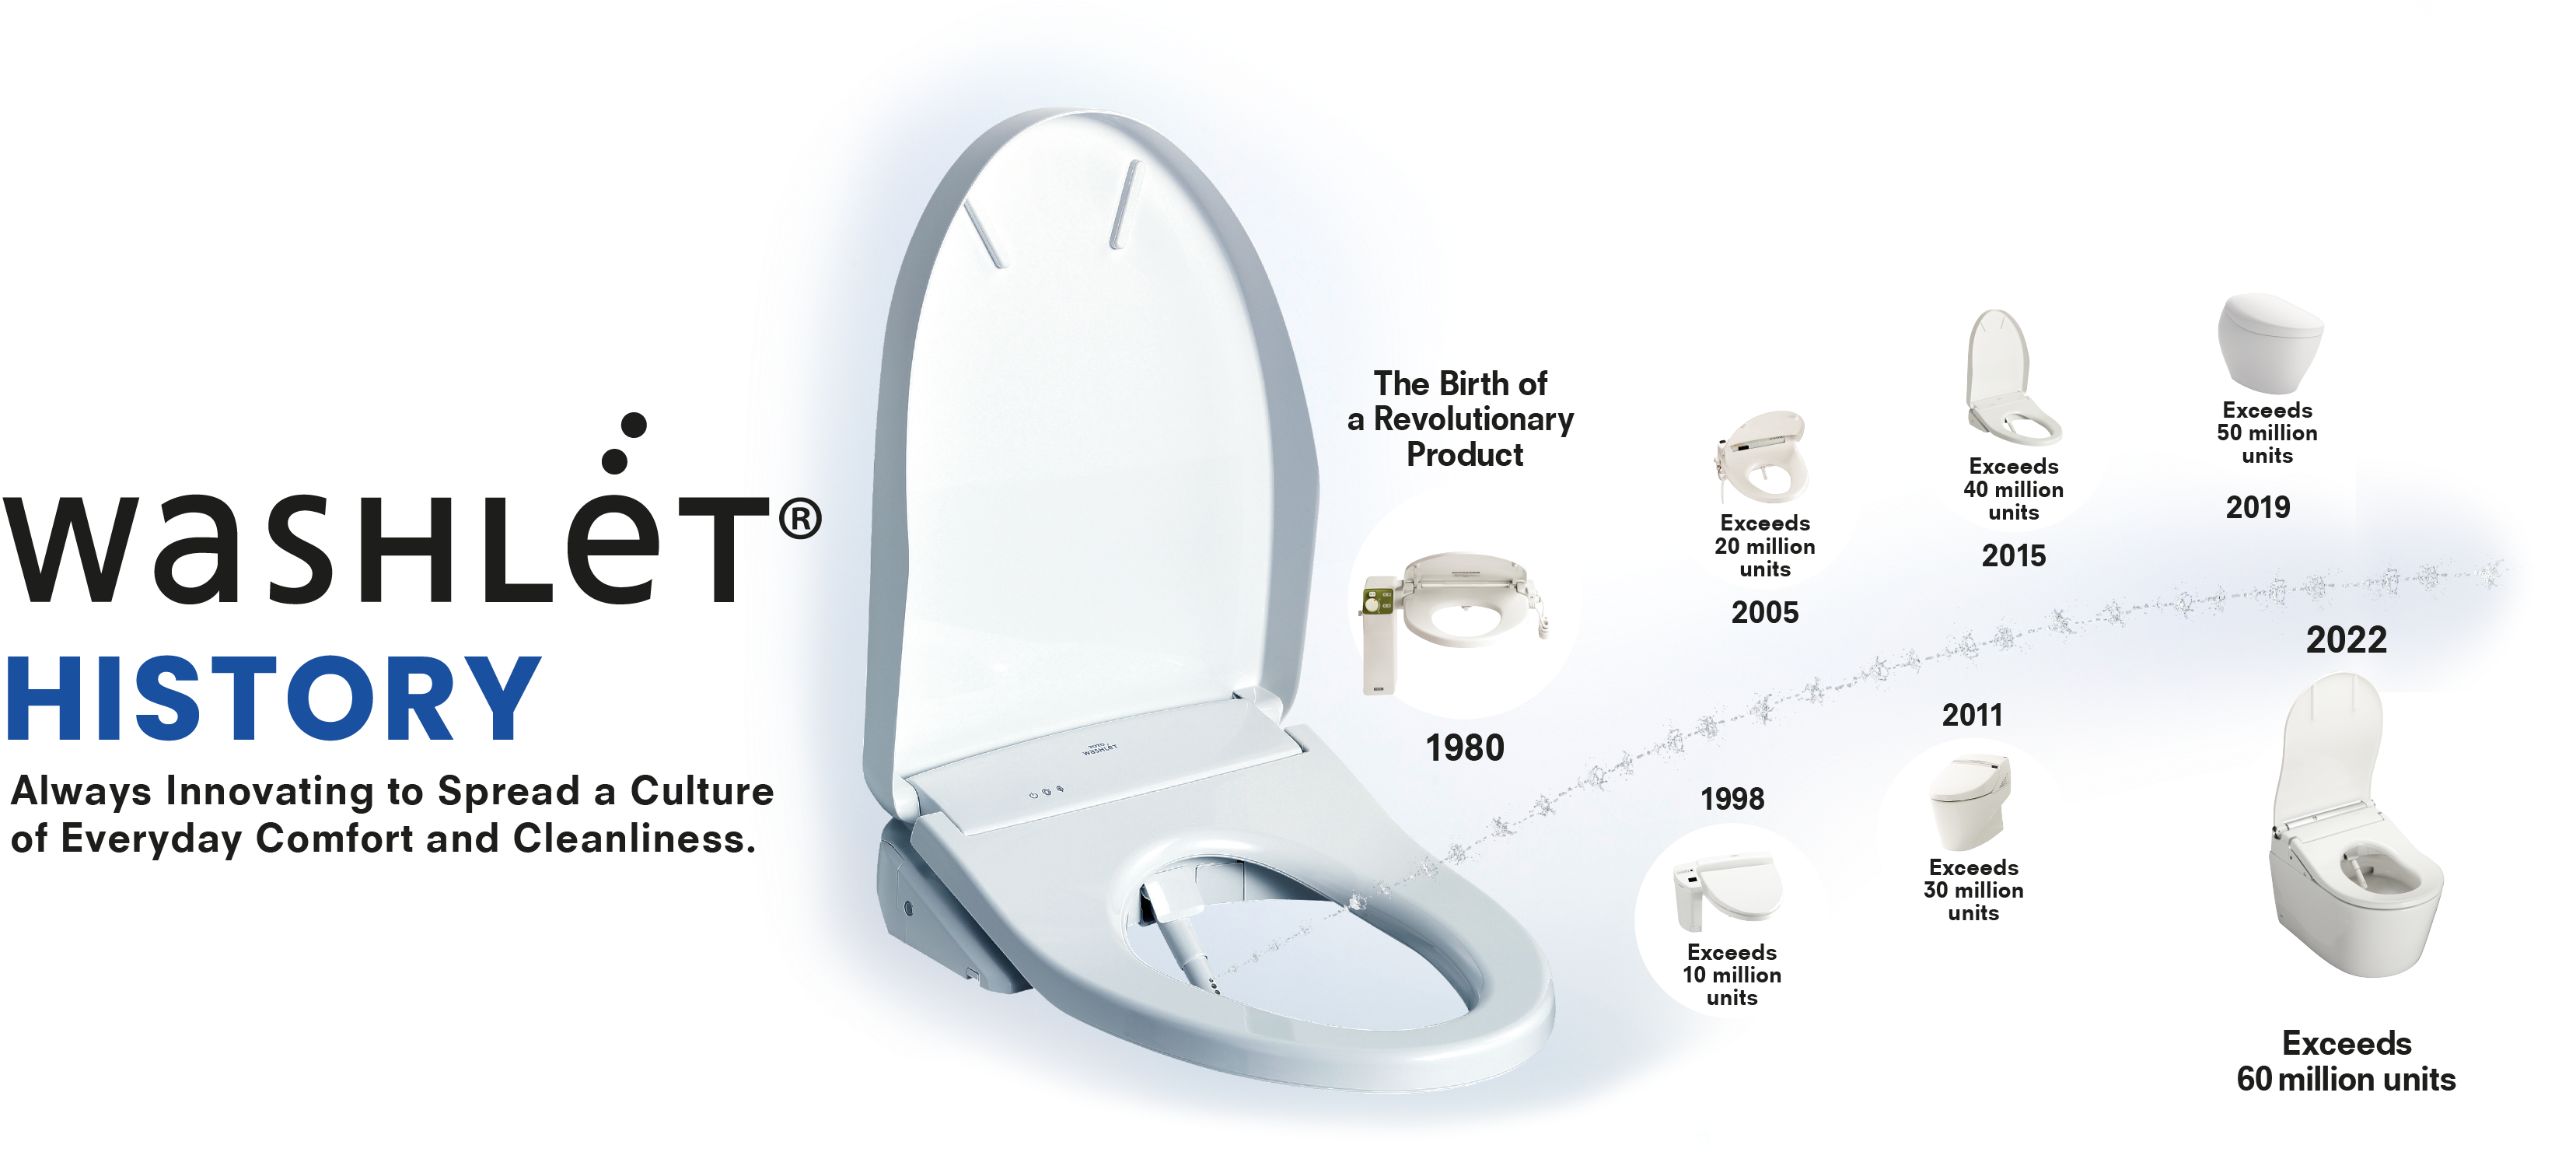 WASHLET HISTORY Always Innovating to Spread a Culture of Everyday Comfort and Cleanliness.